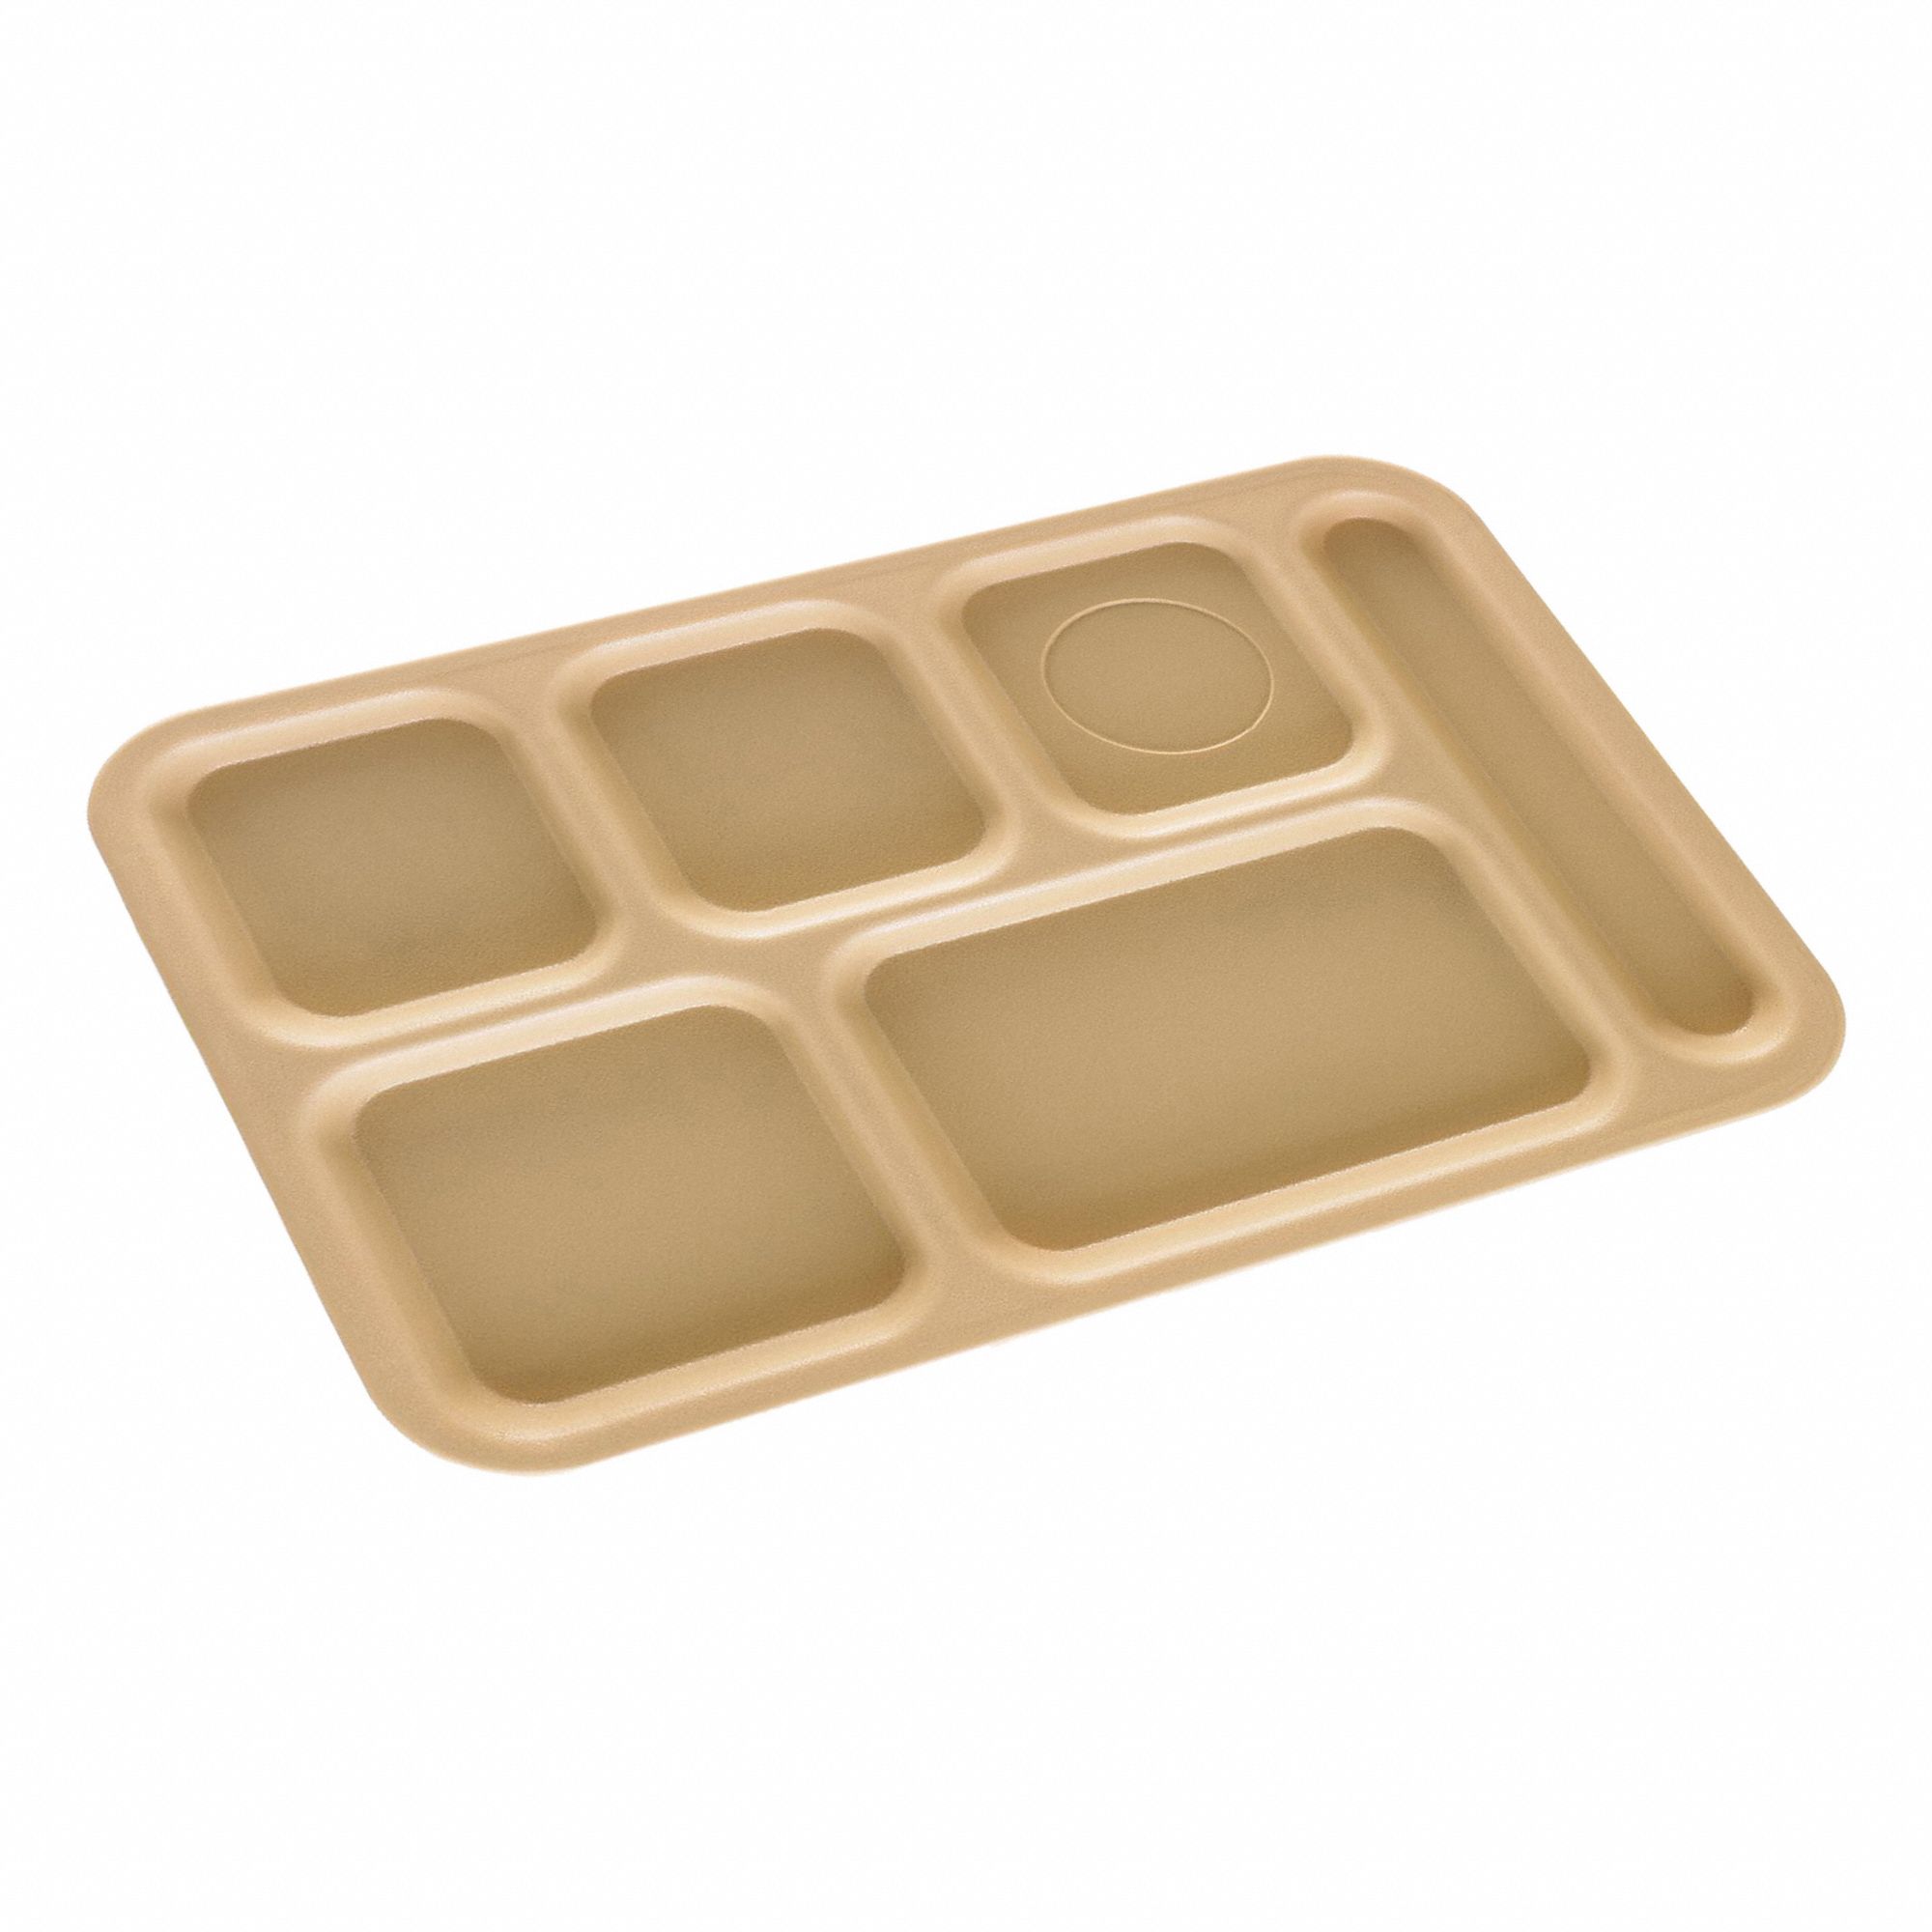 Cook's 630-420 5-Compartment Cafeteria Food Trays